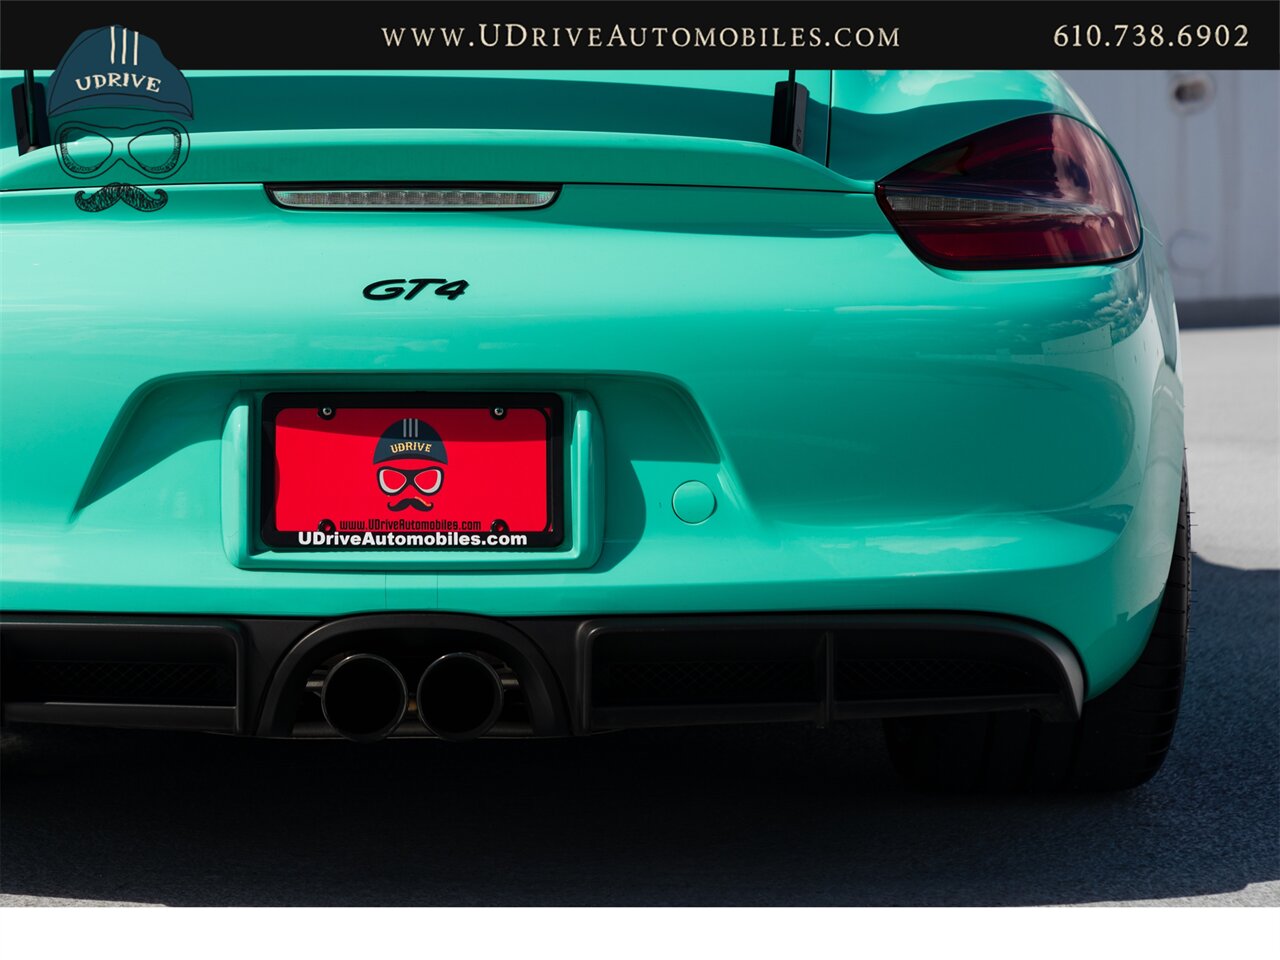 2016 Porsche Cayman GT4  PTS Mint Green 1 of 2 PCCB Bucket Seats PPF - Photo 21 - West Chester, PA 19382